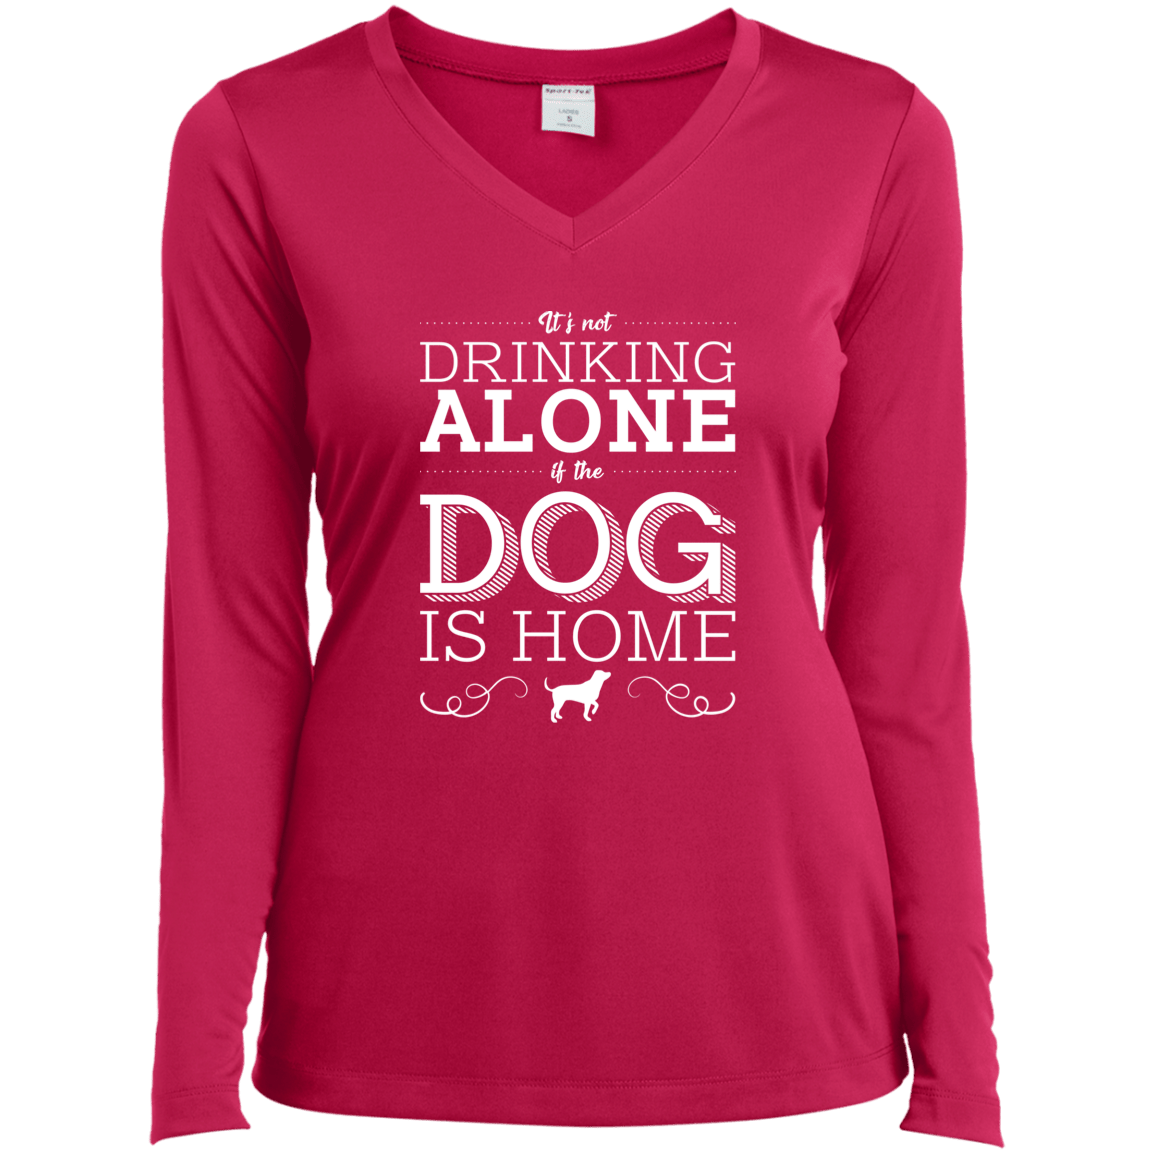 It's Not Drinking Alone - Long Sleeve Ladies V Neck.